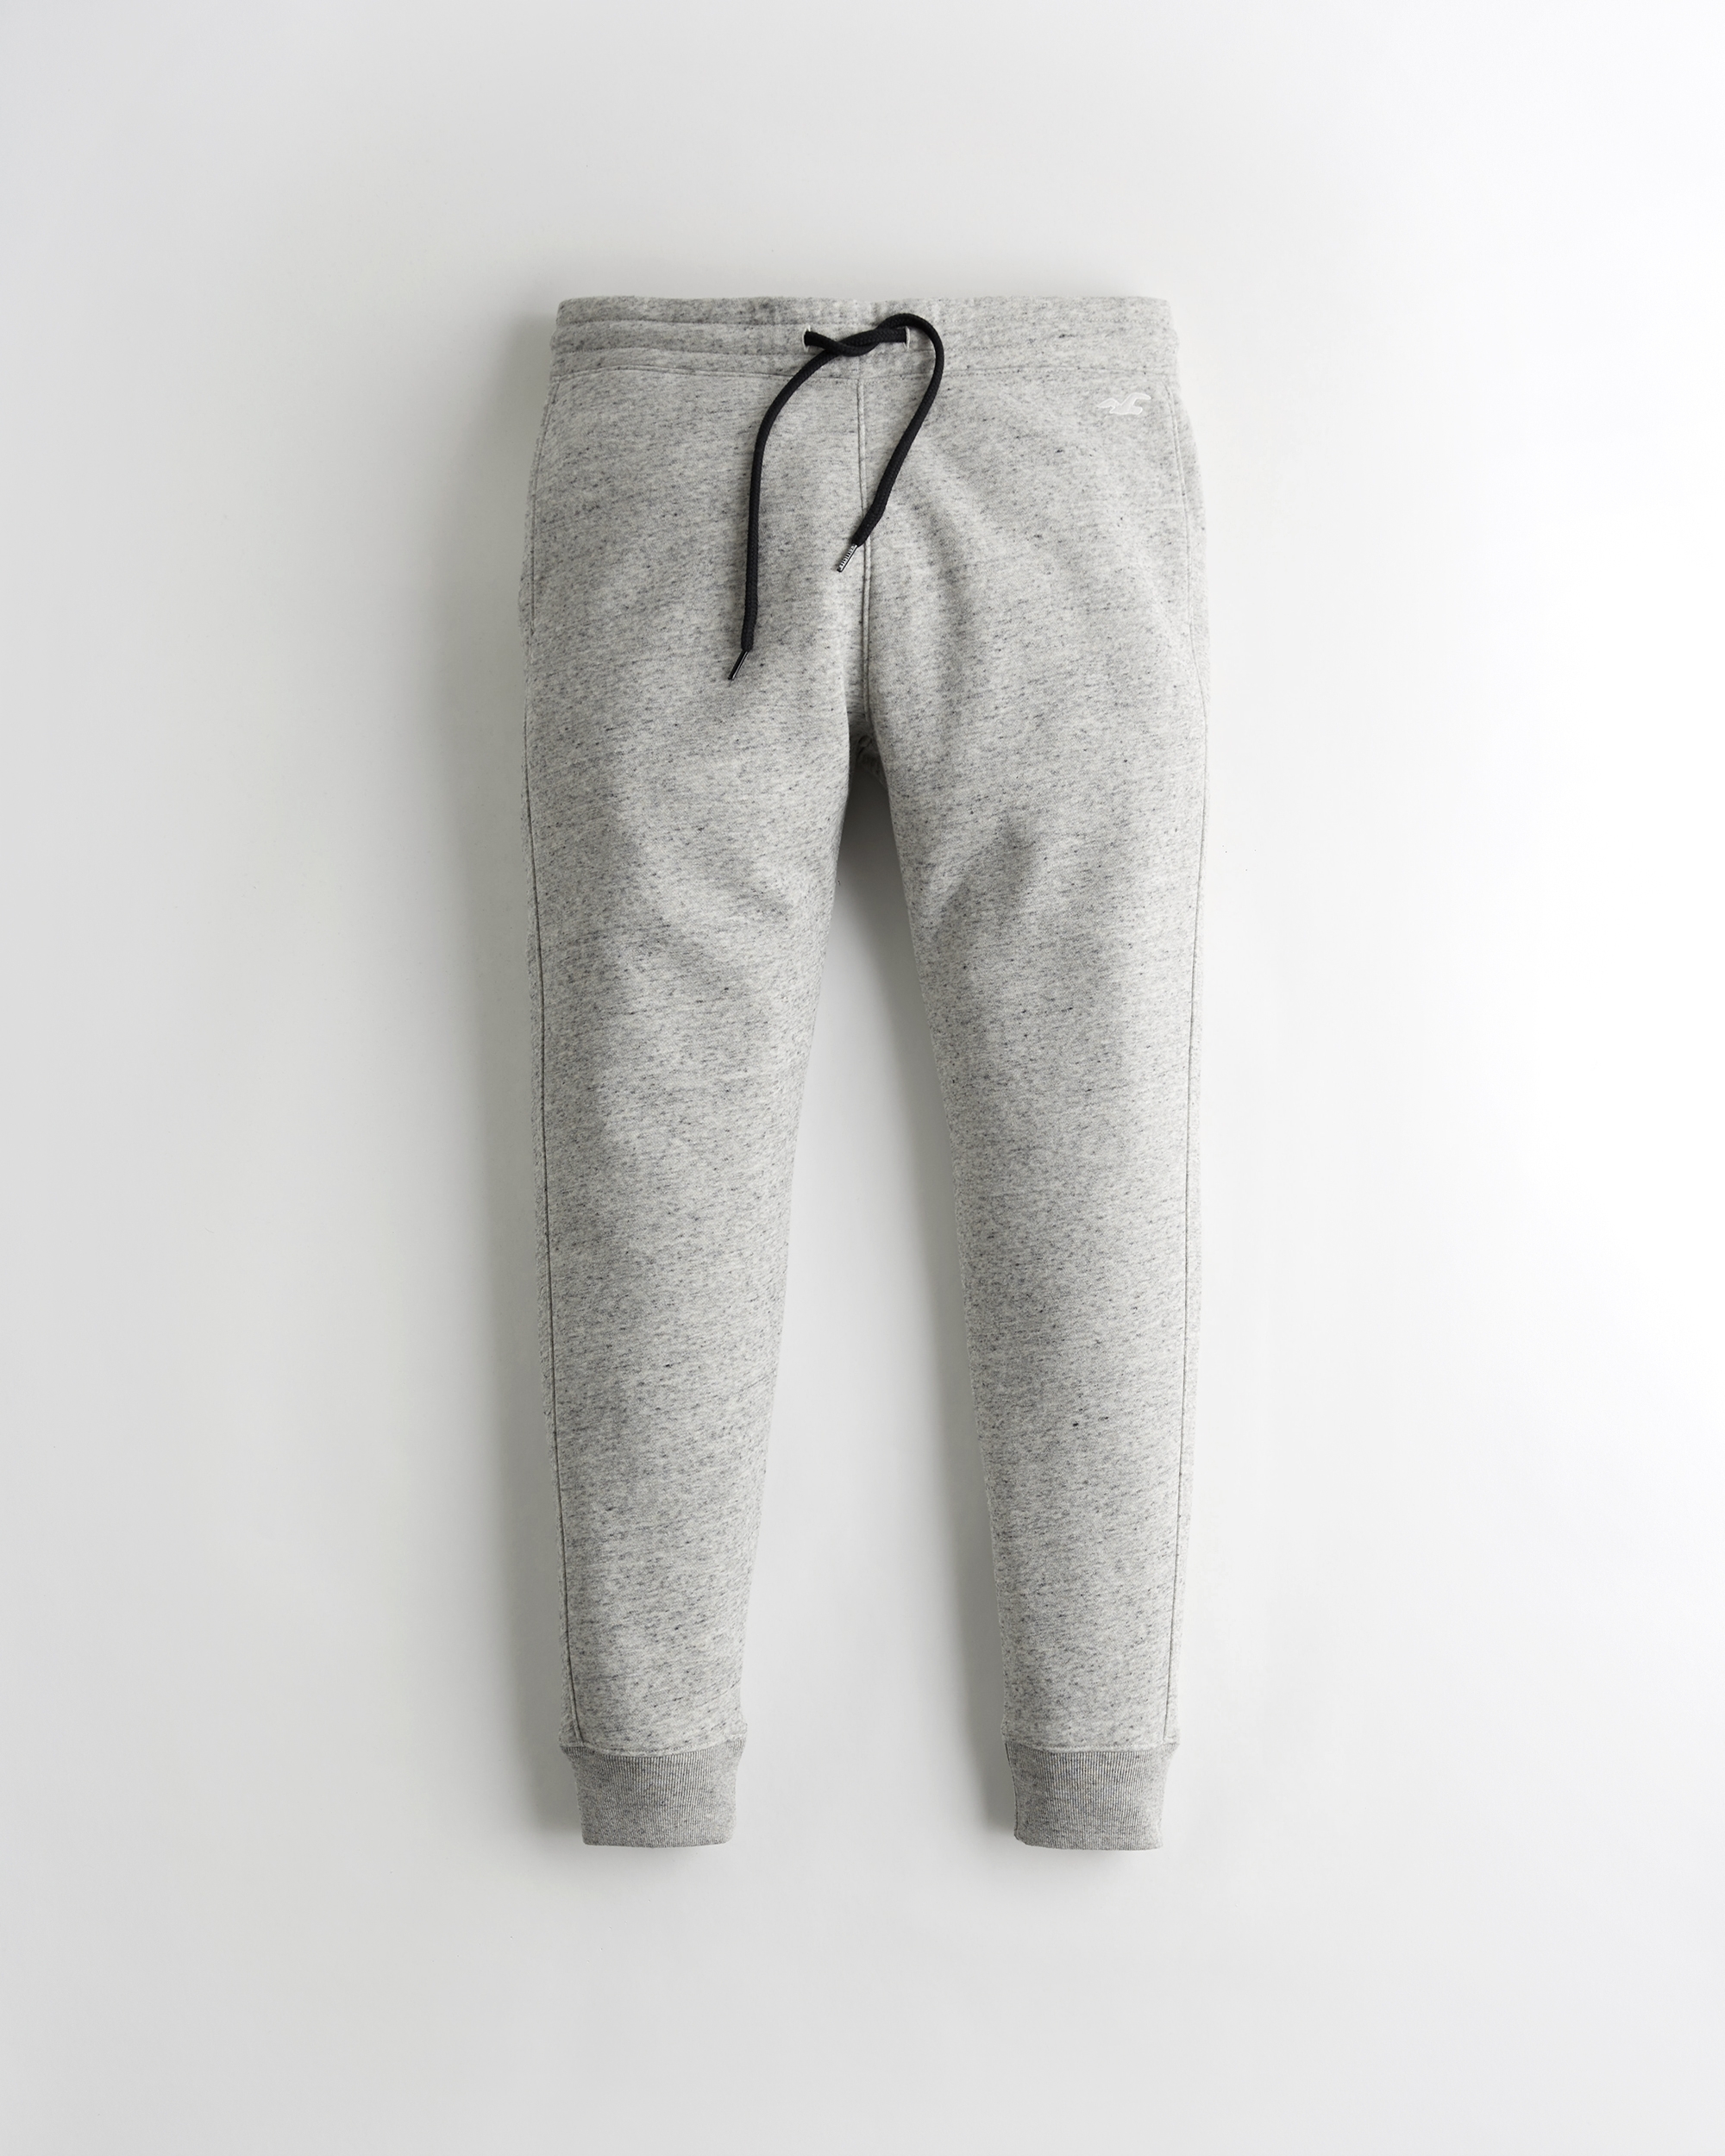 hollister red joggers